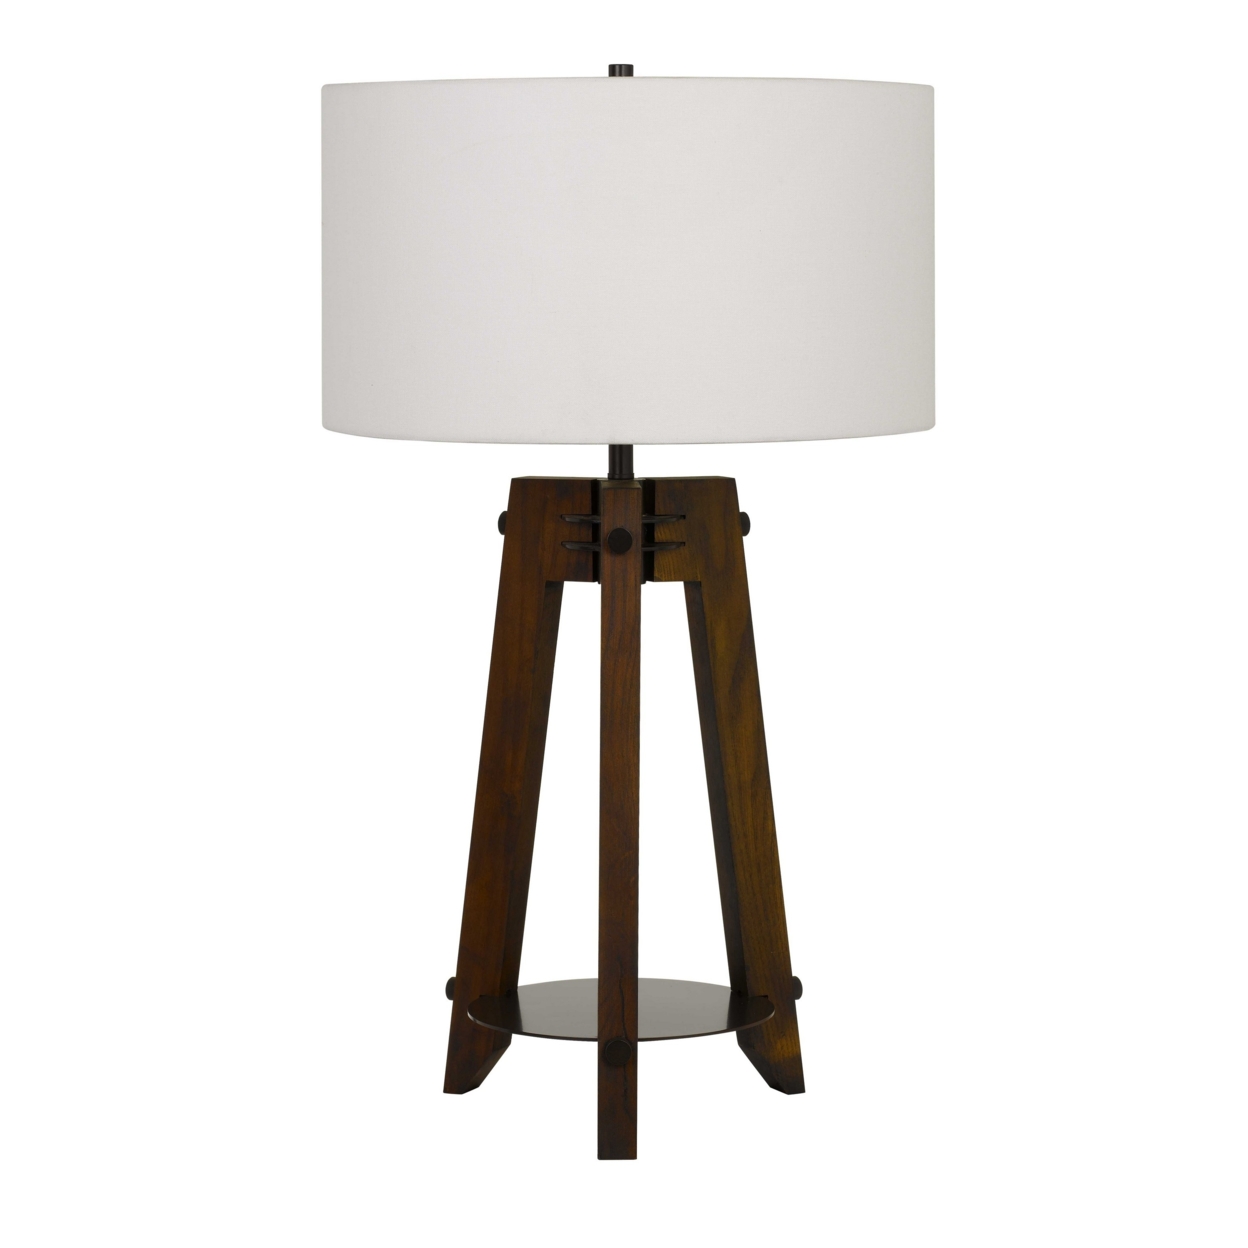 Drum Shade Table Lamp With Wooden Tripod Base, White And Brown- Saltoro Sherpi